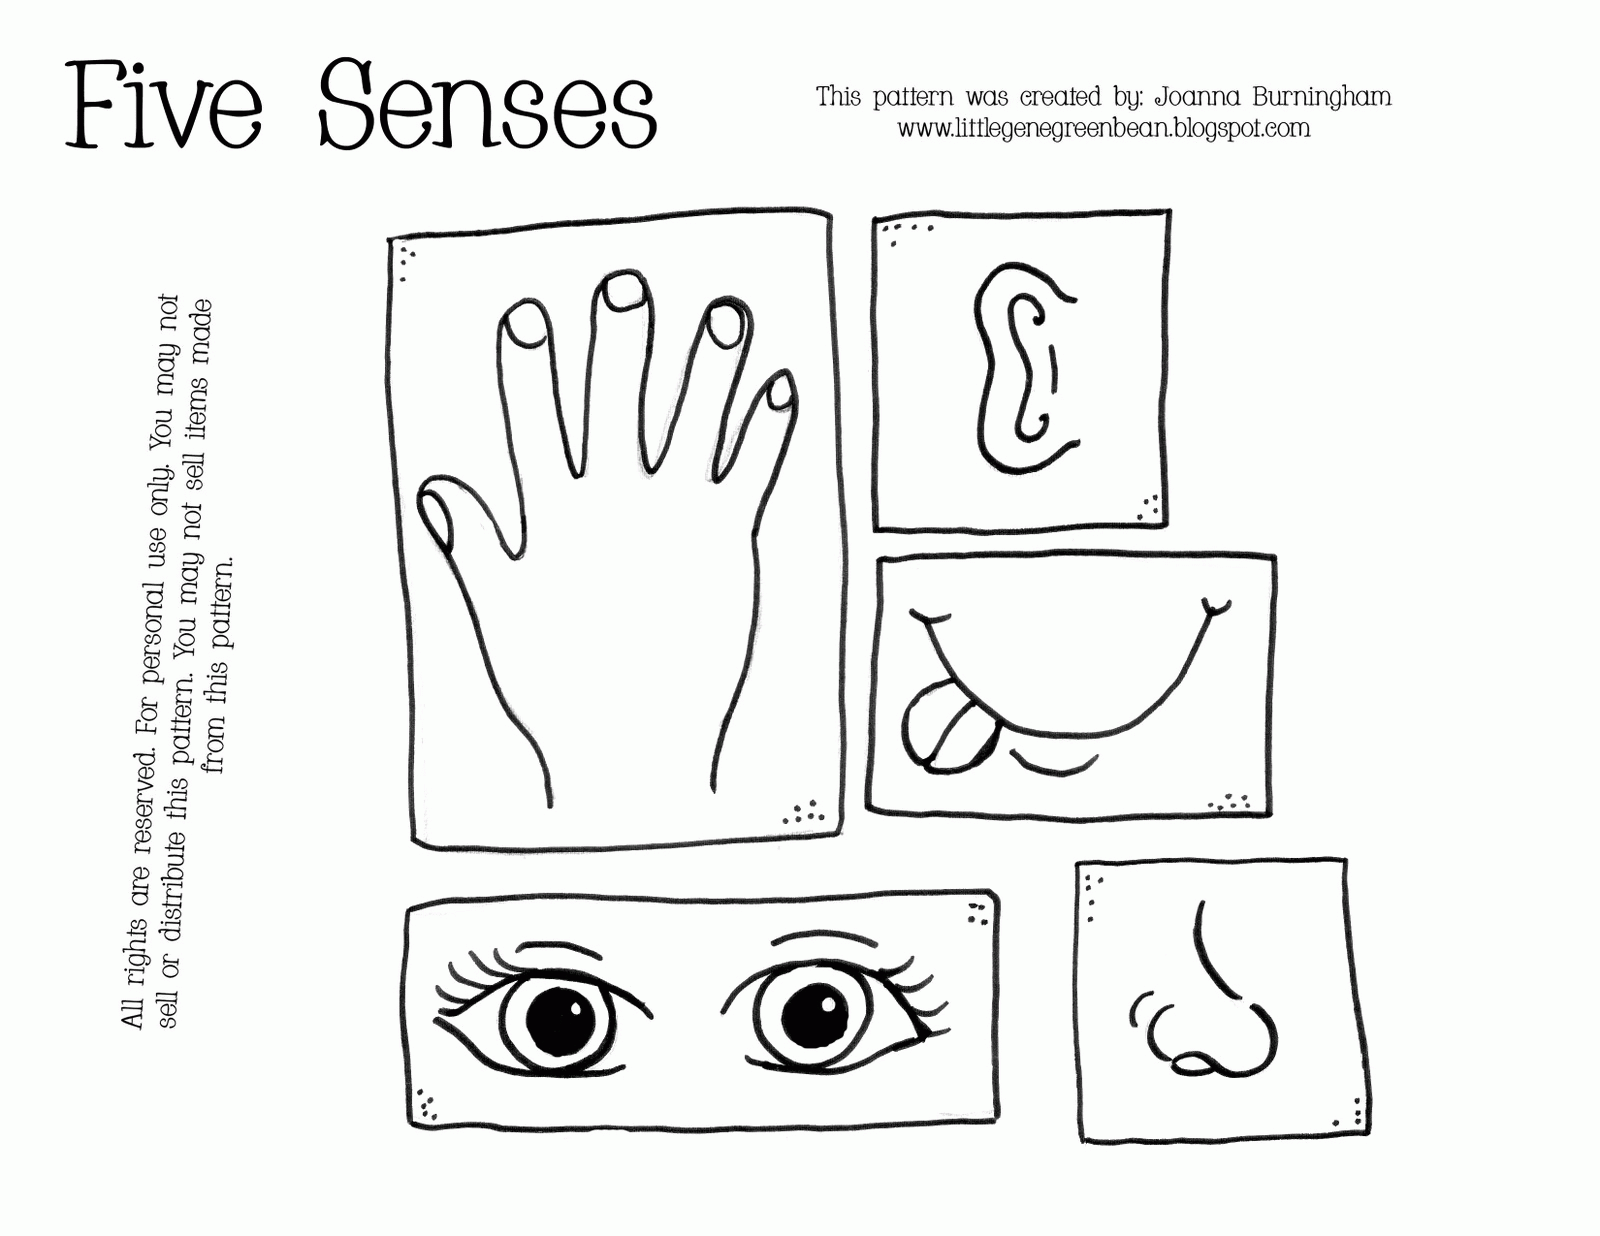 Free Printable Five Senses Coloring Pages - Coloring pages